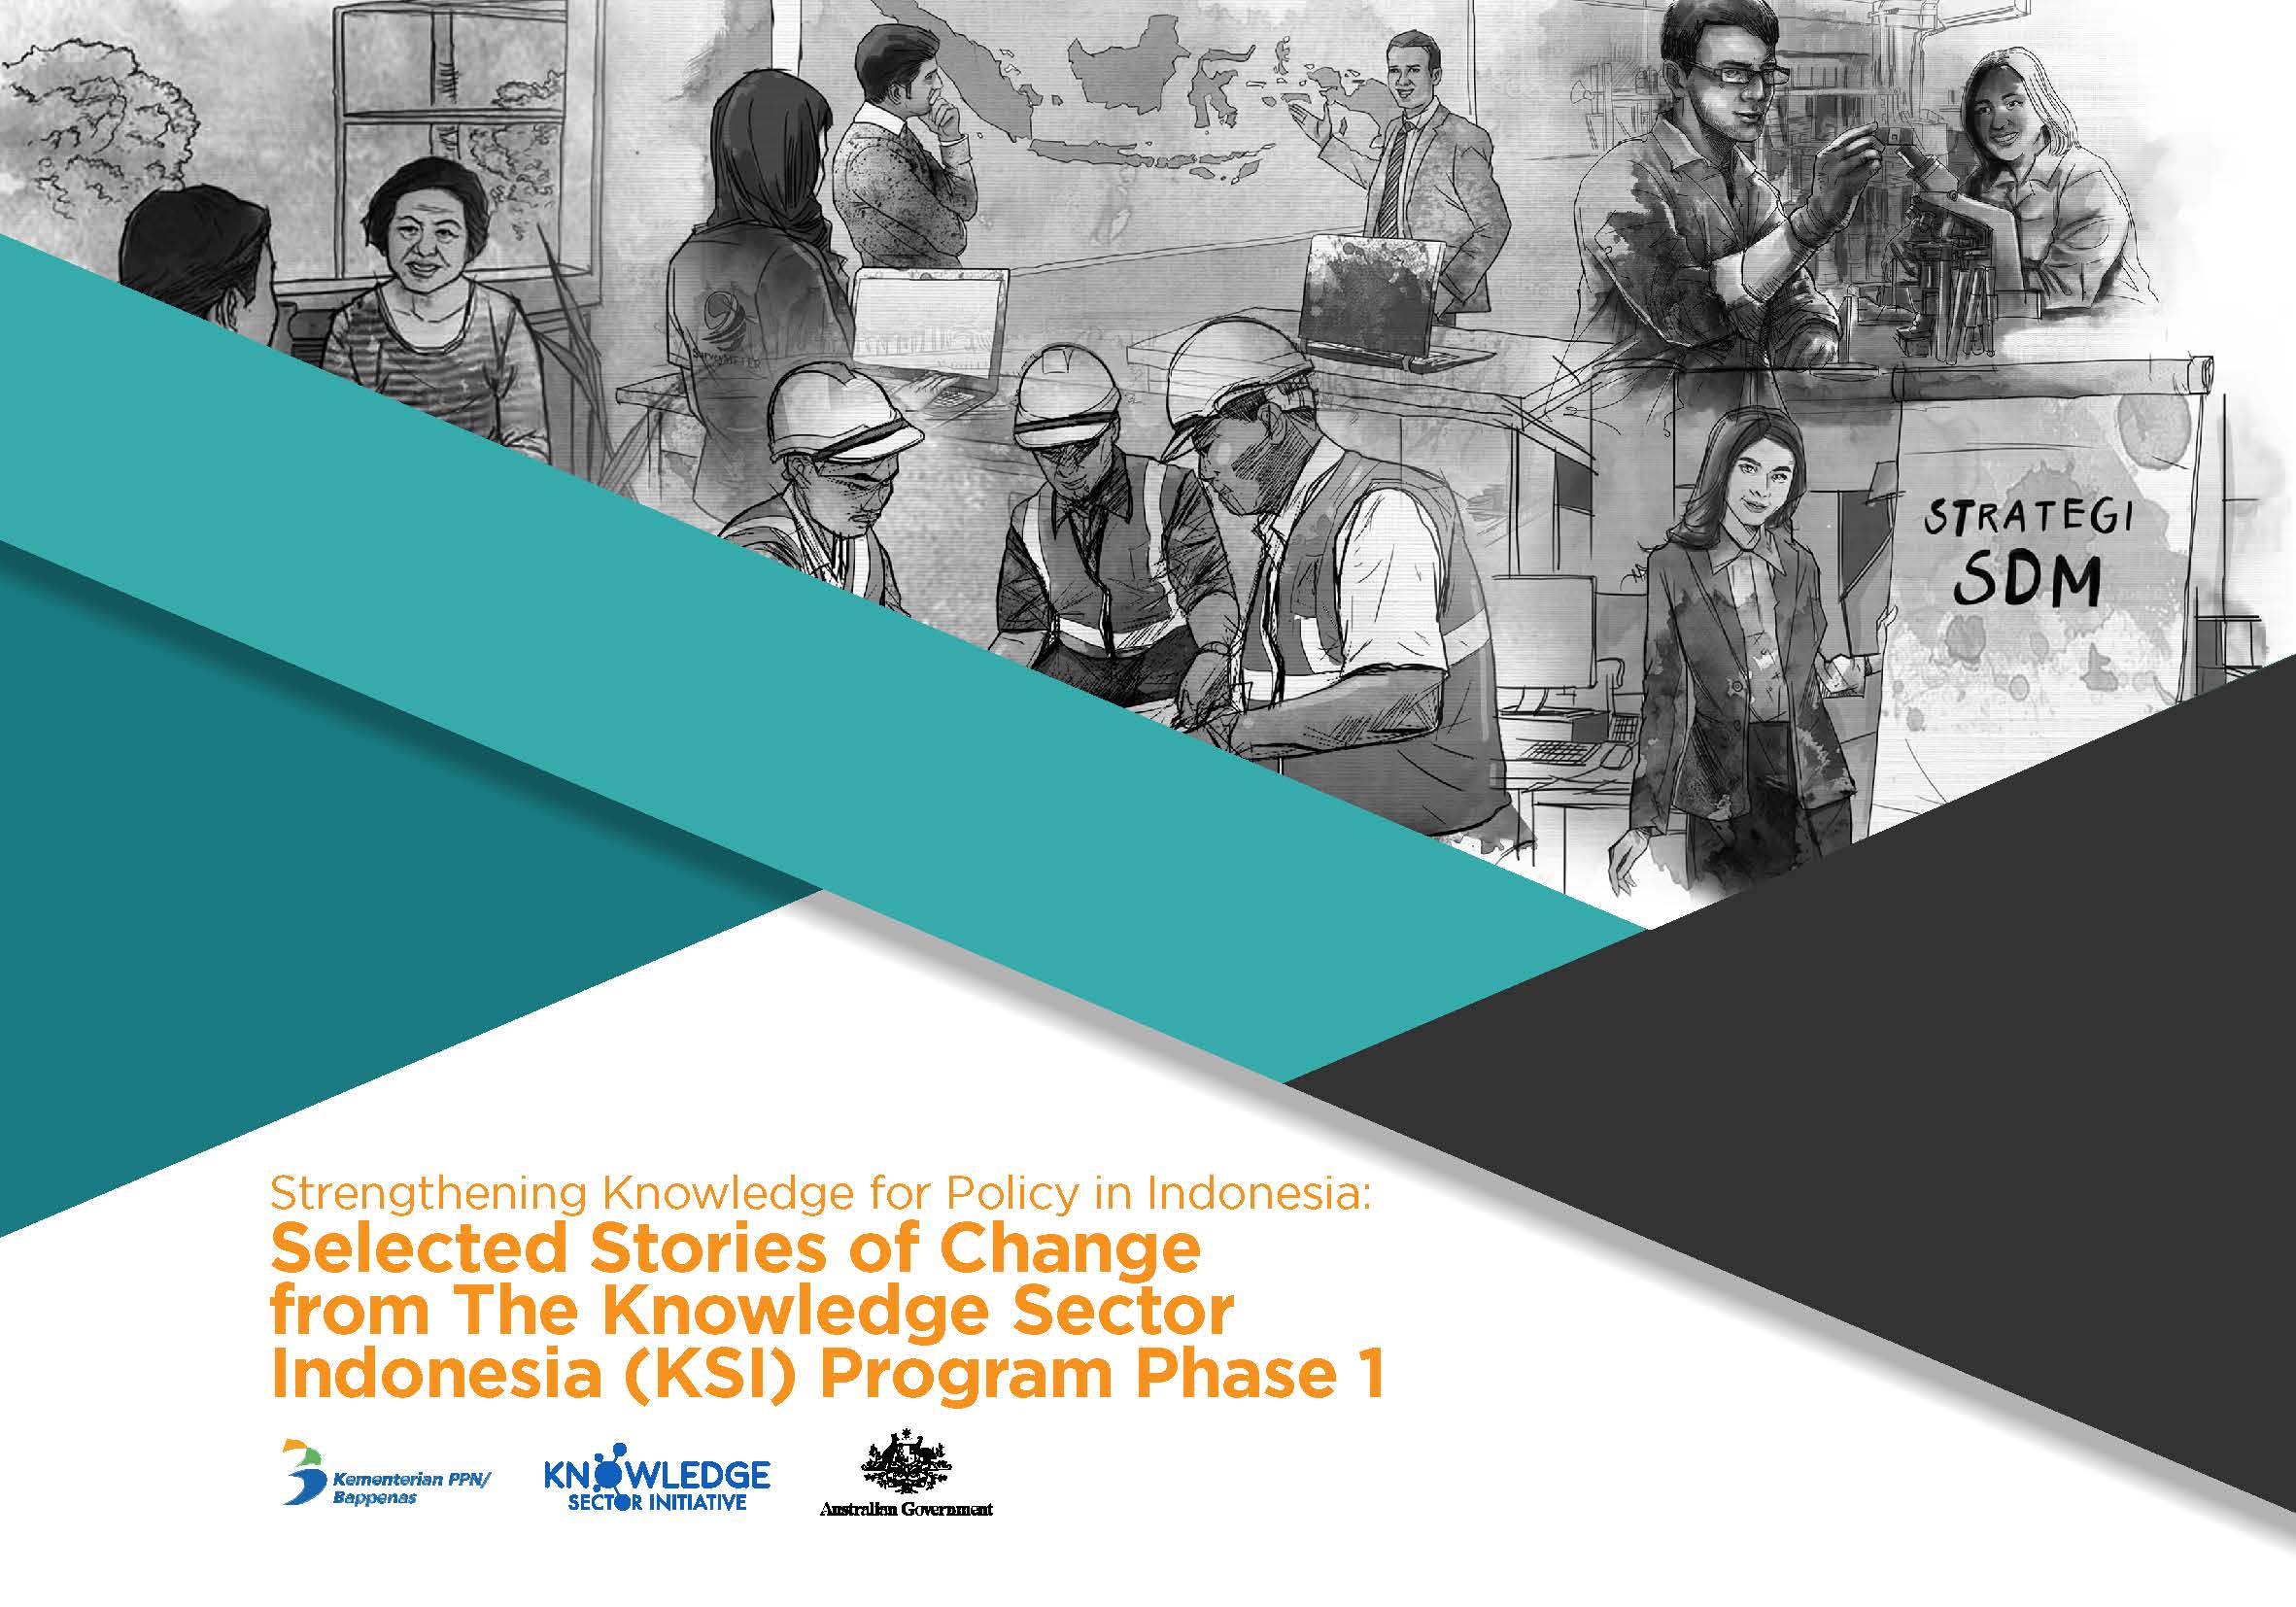 Selected Stories of Change from The Knowledge Sector Indonesia (KSI) Program Phase 1